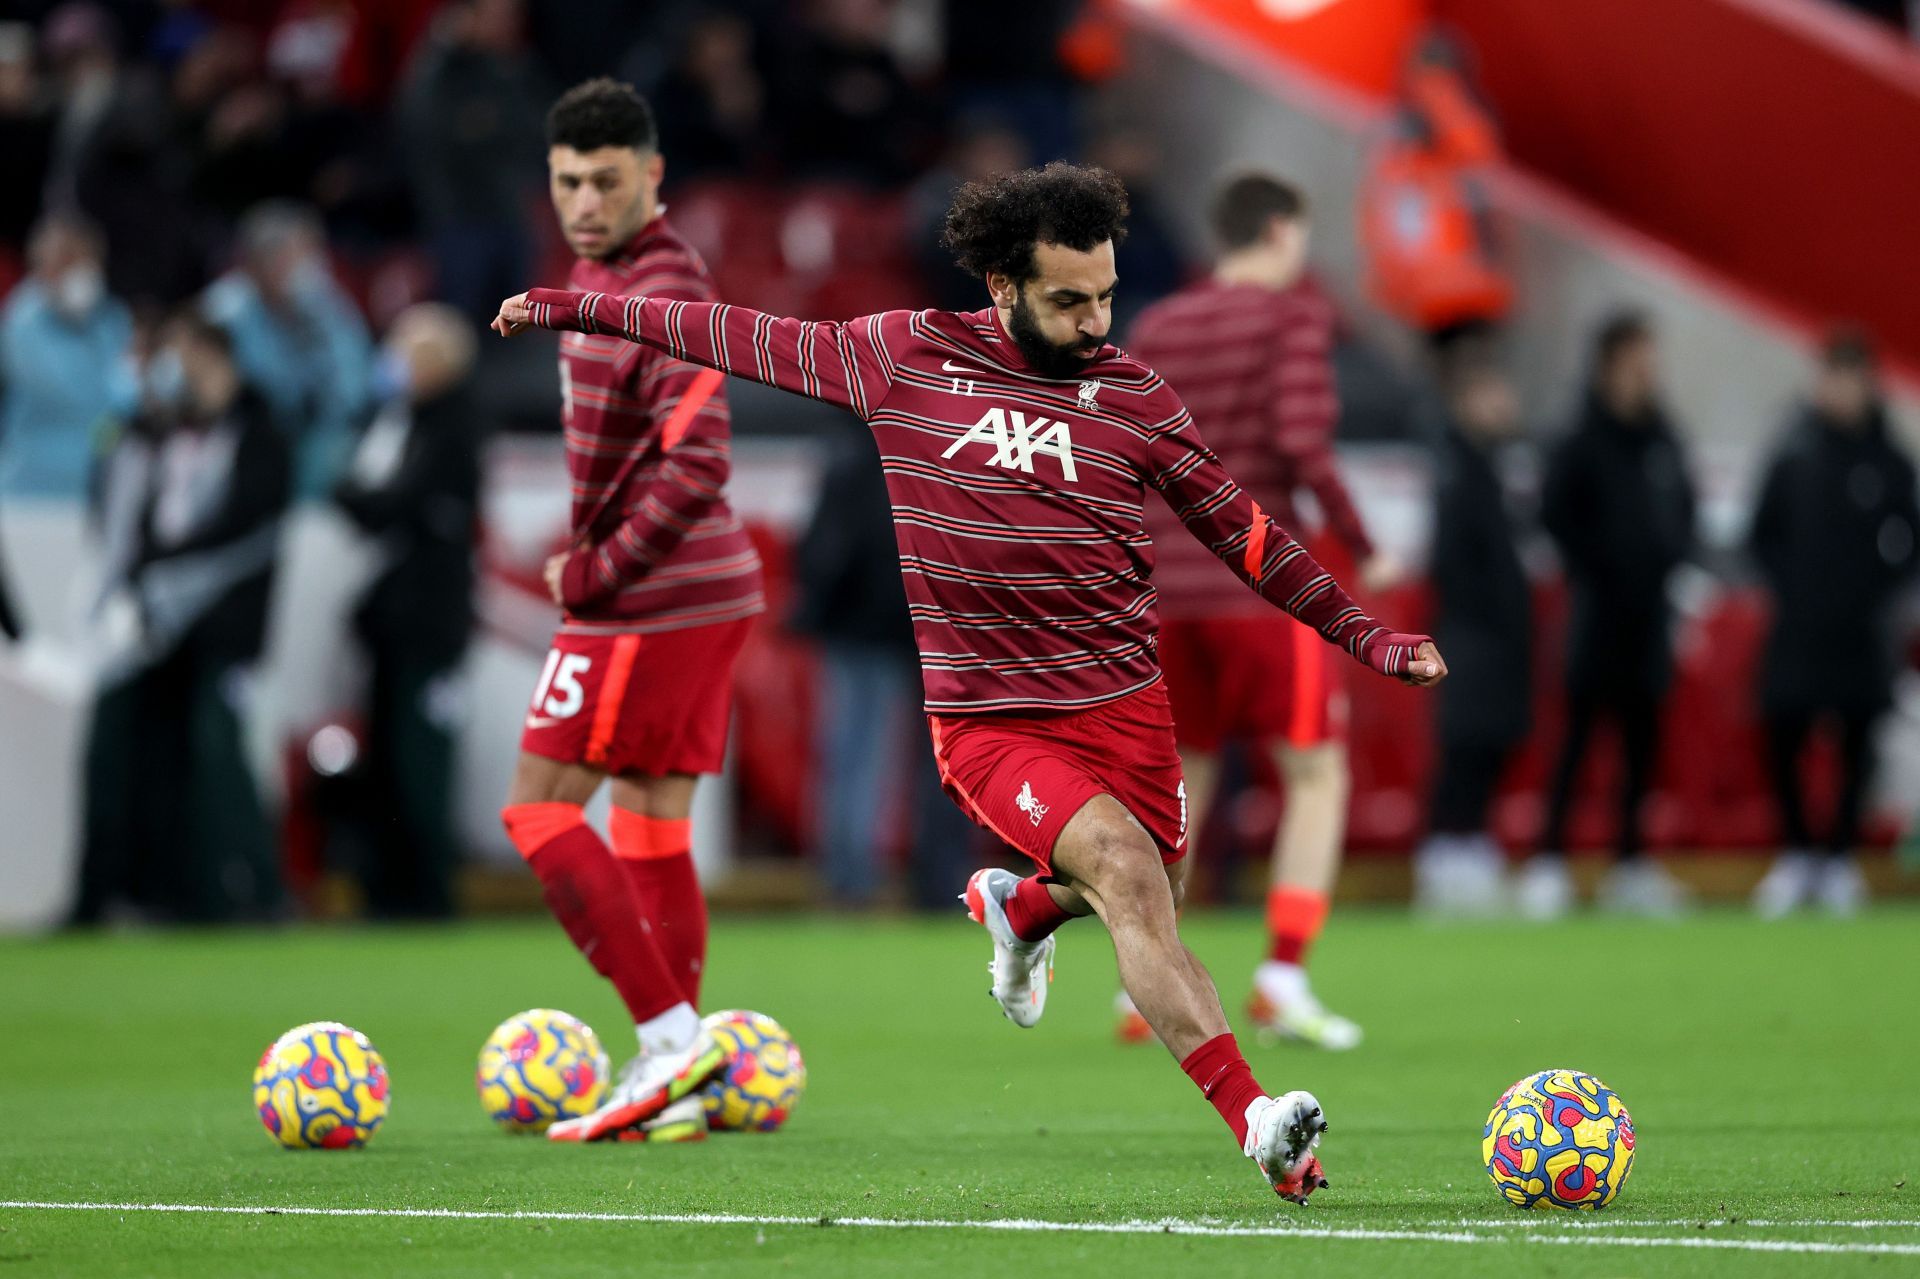 Mohamed Salah continues to break records for Liverpool.